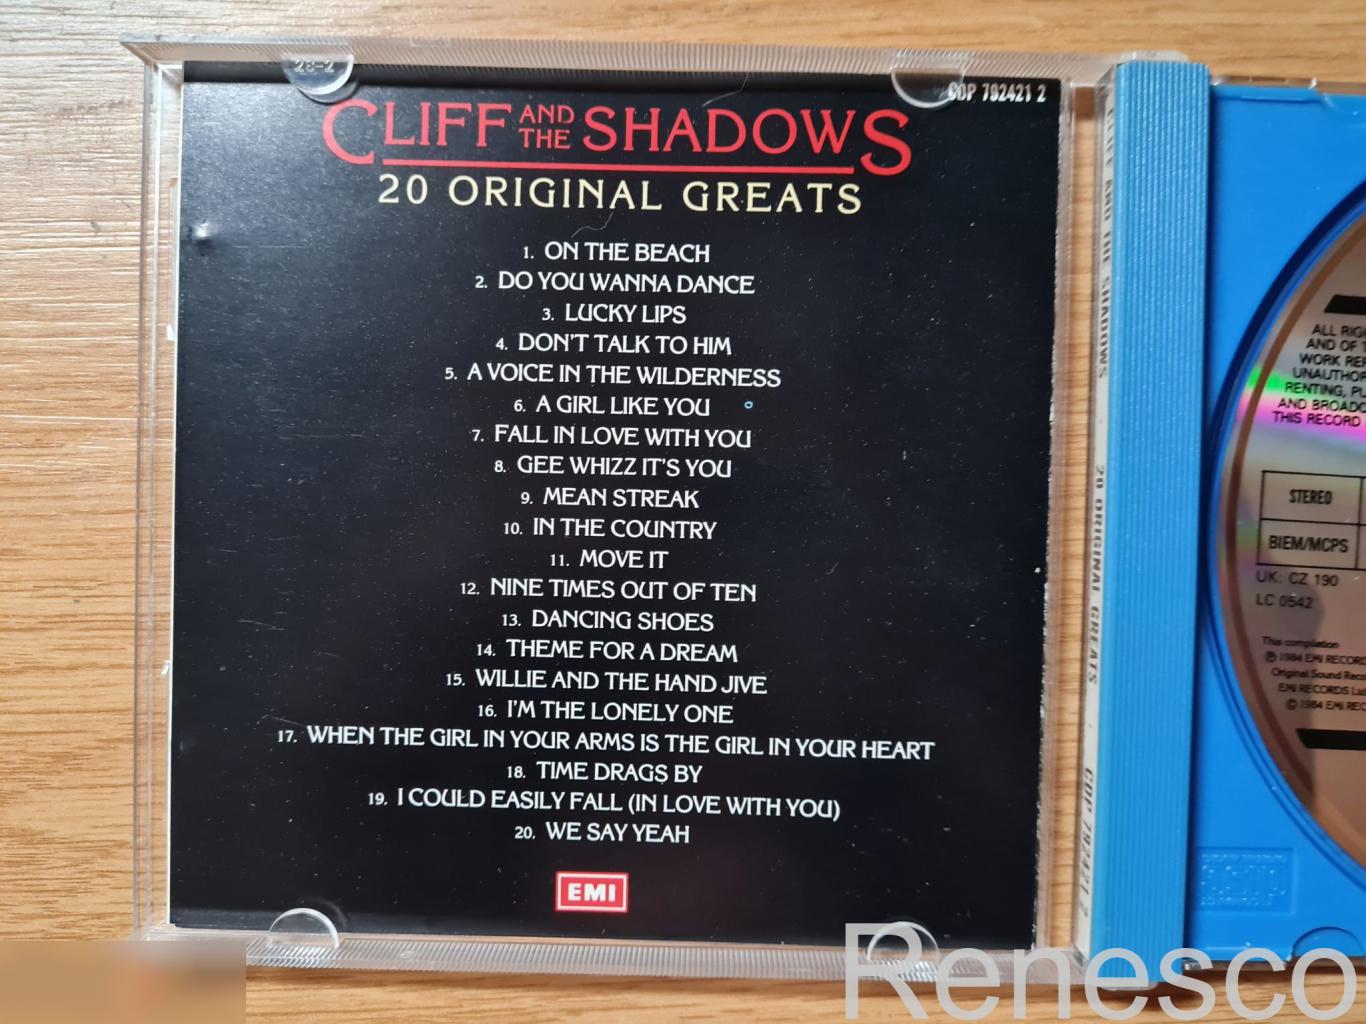 Cliff And The Shadows – 20 Original Greats (UK) (Reissue) 3